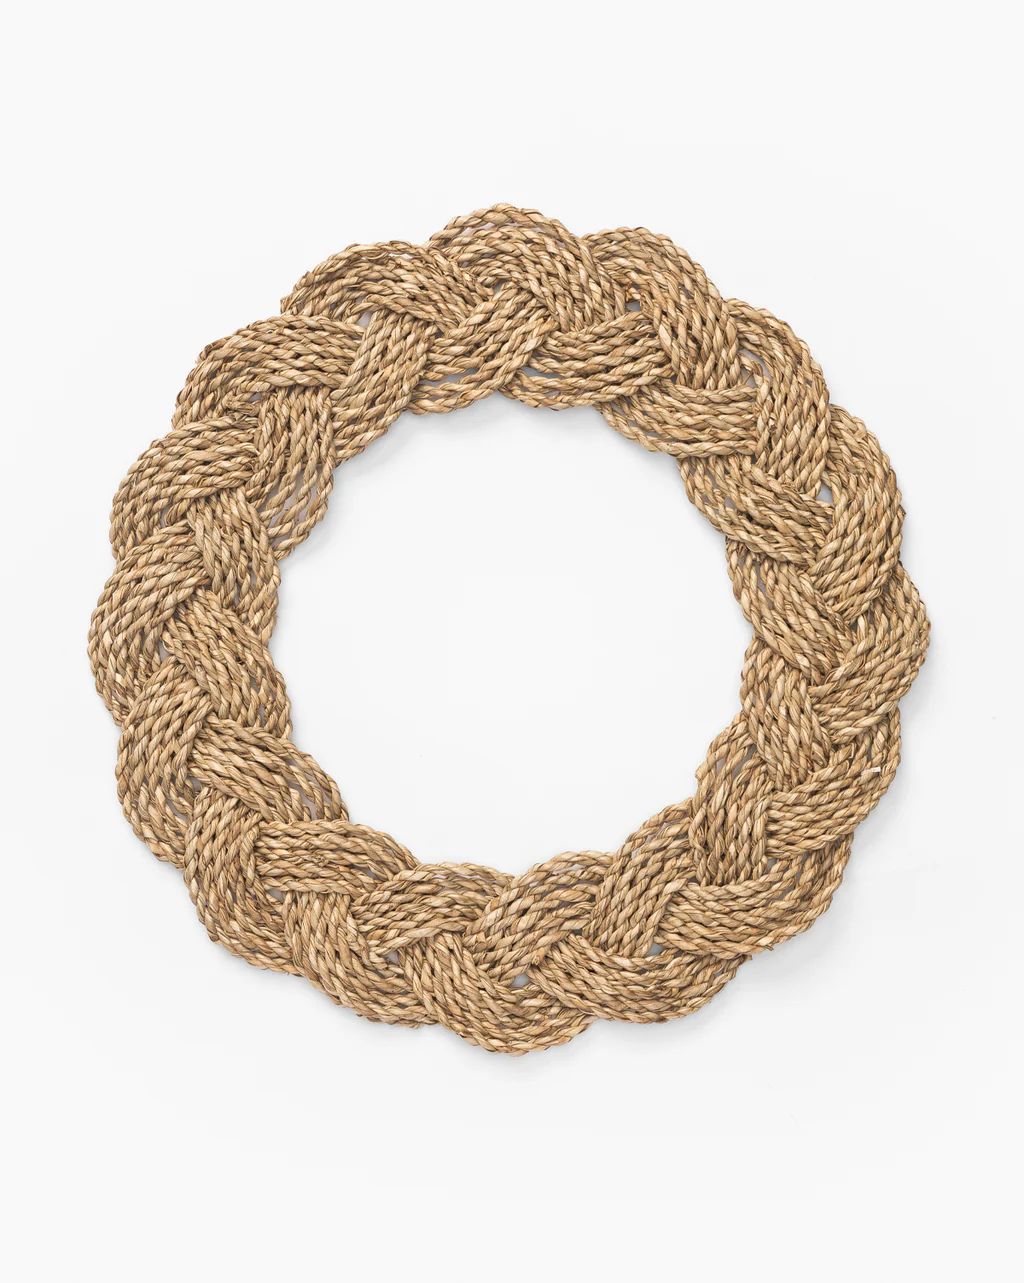 Braided Placemat | McGee & Co.